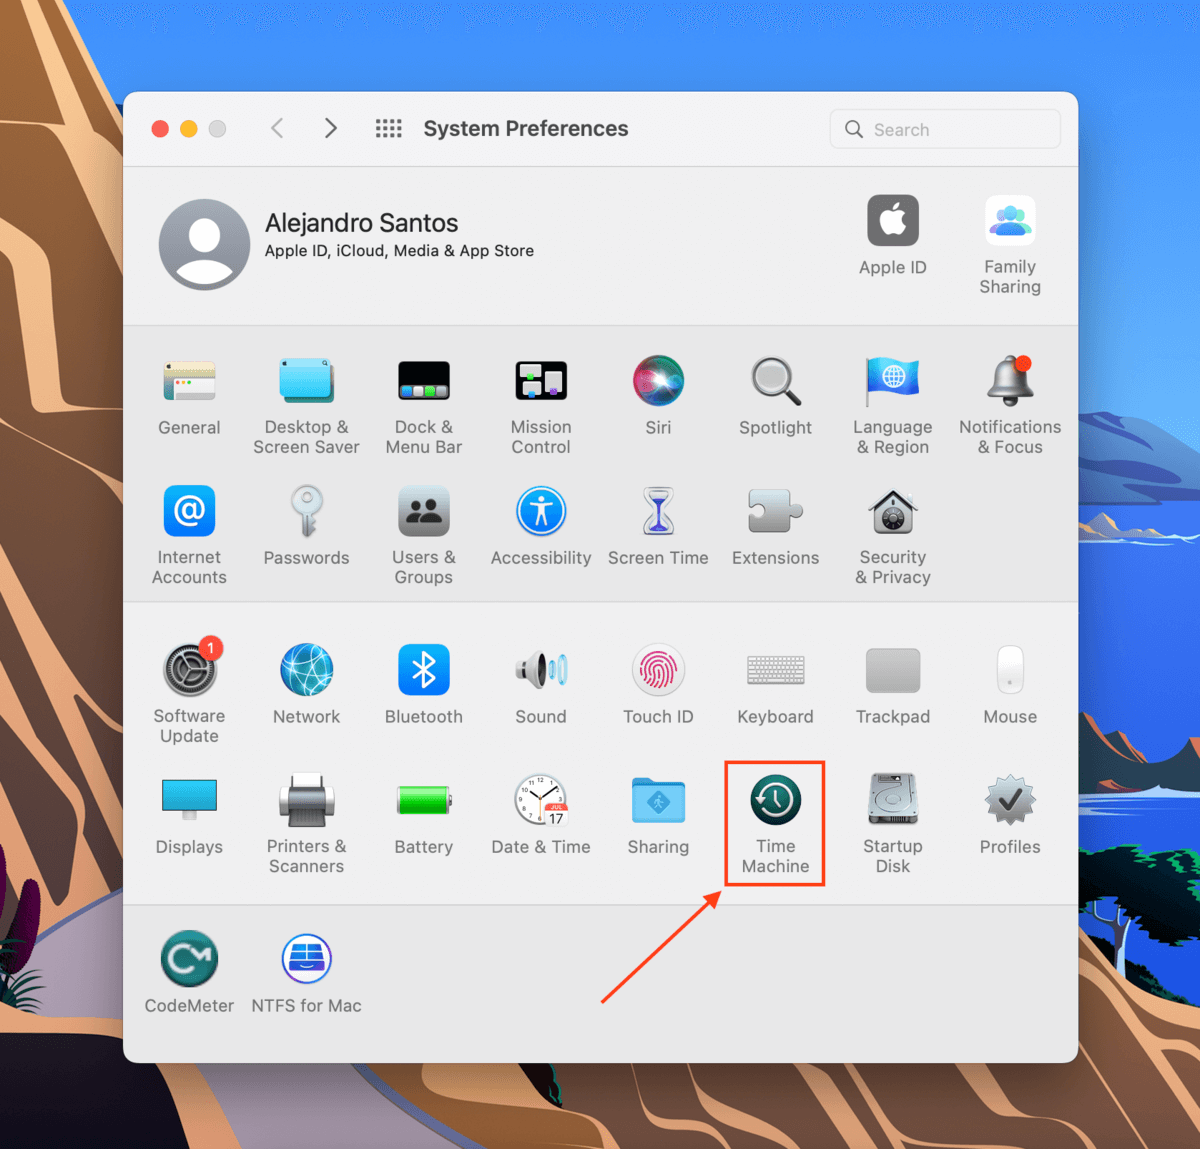 Time machine icon in System Preferences window